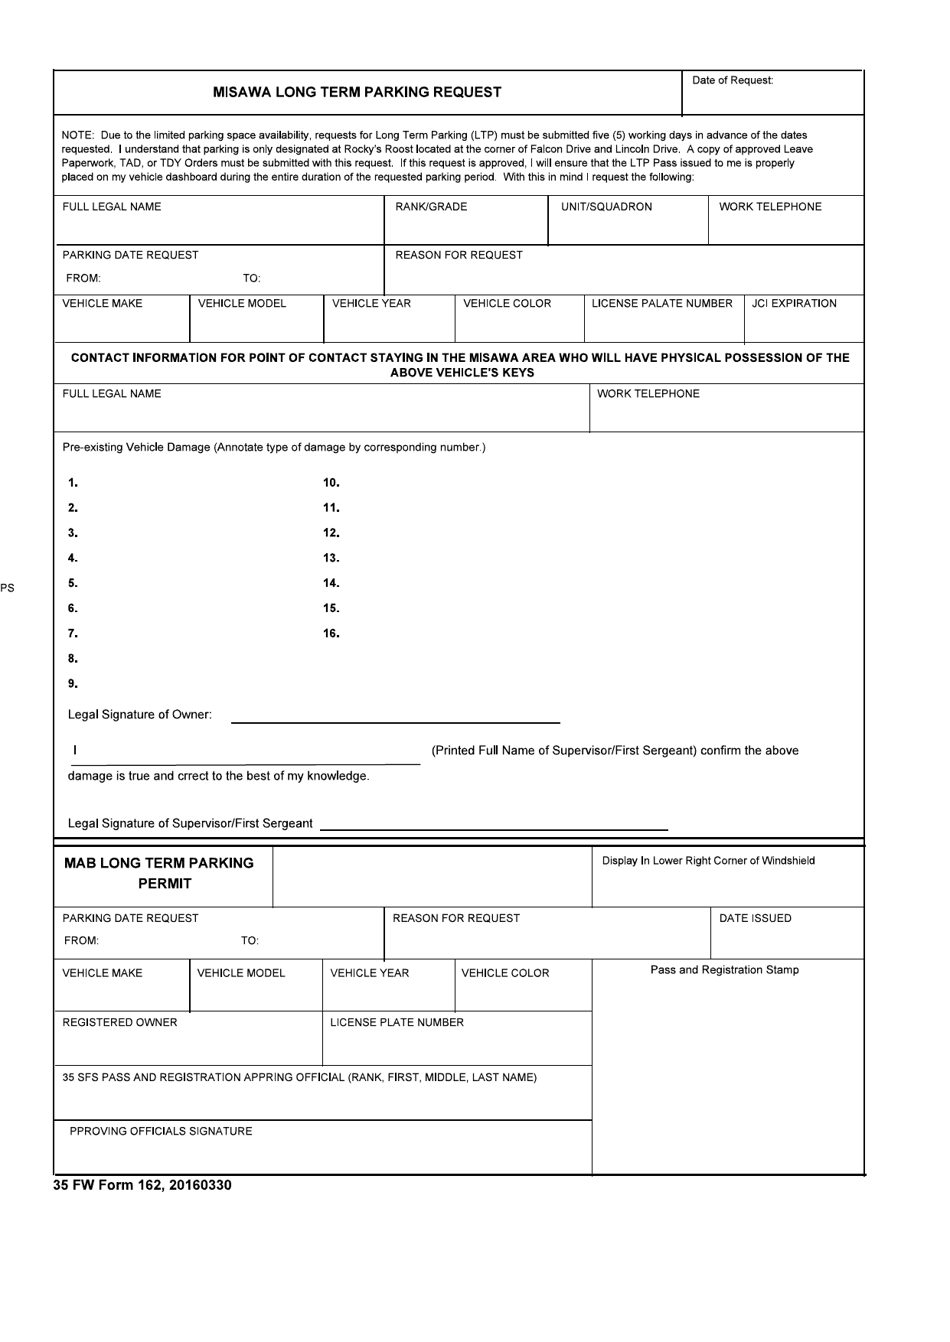 35 FW Form 162 Misawa Long Term Parking Request, Page 1